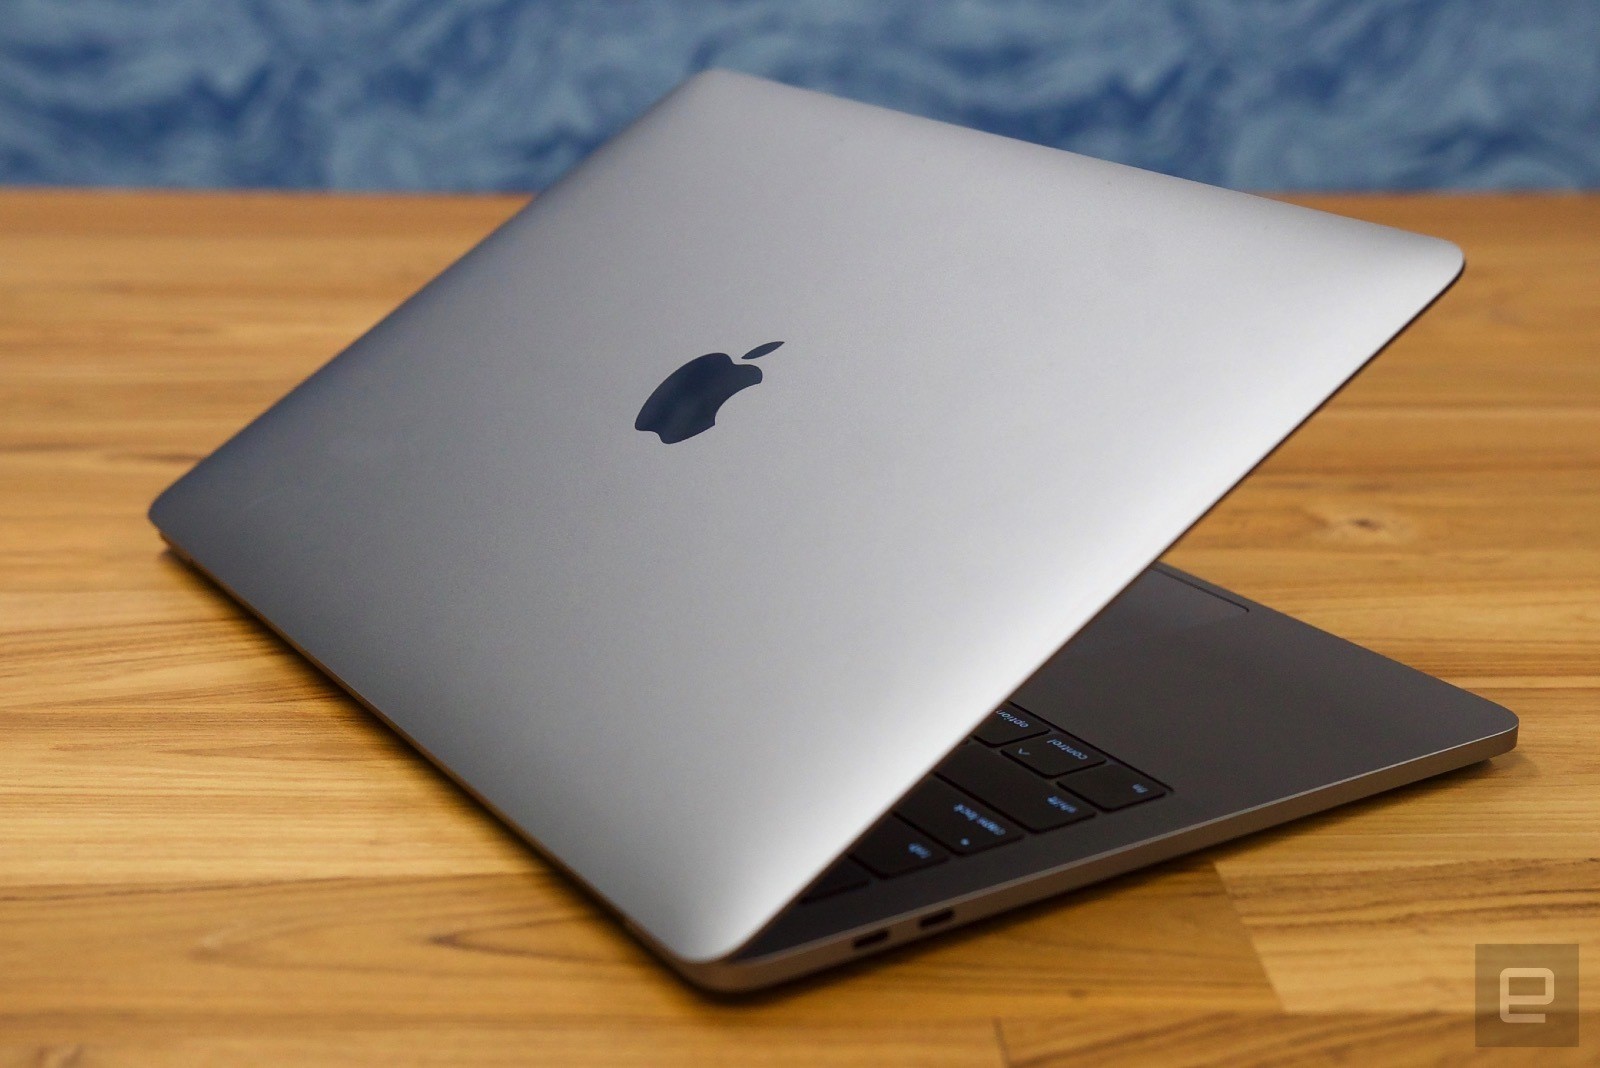 Macbook Pro 13 Inch 2019 : The 2019 MacBook Pros get the steepest